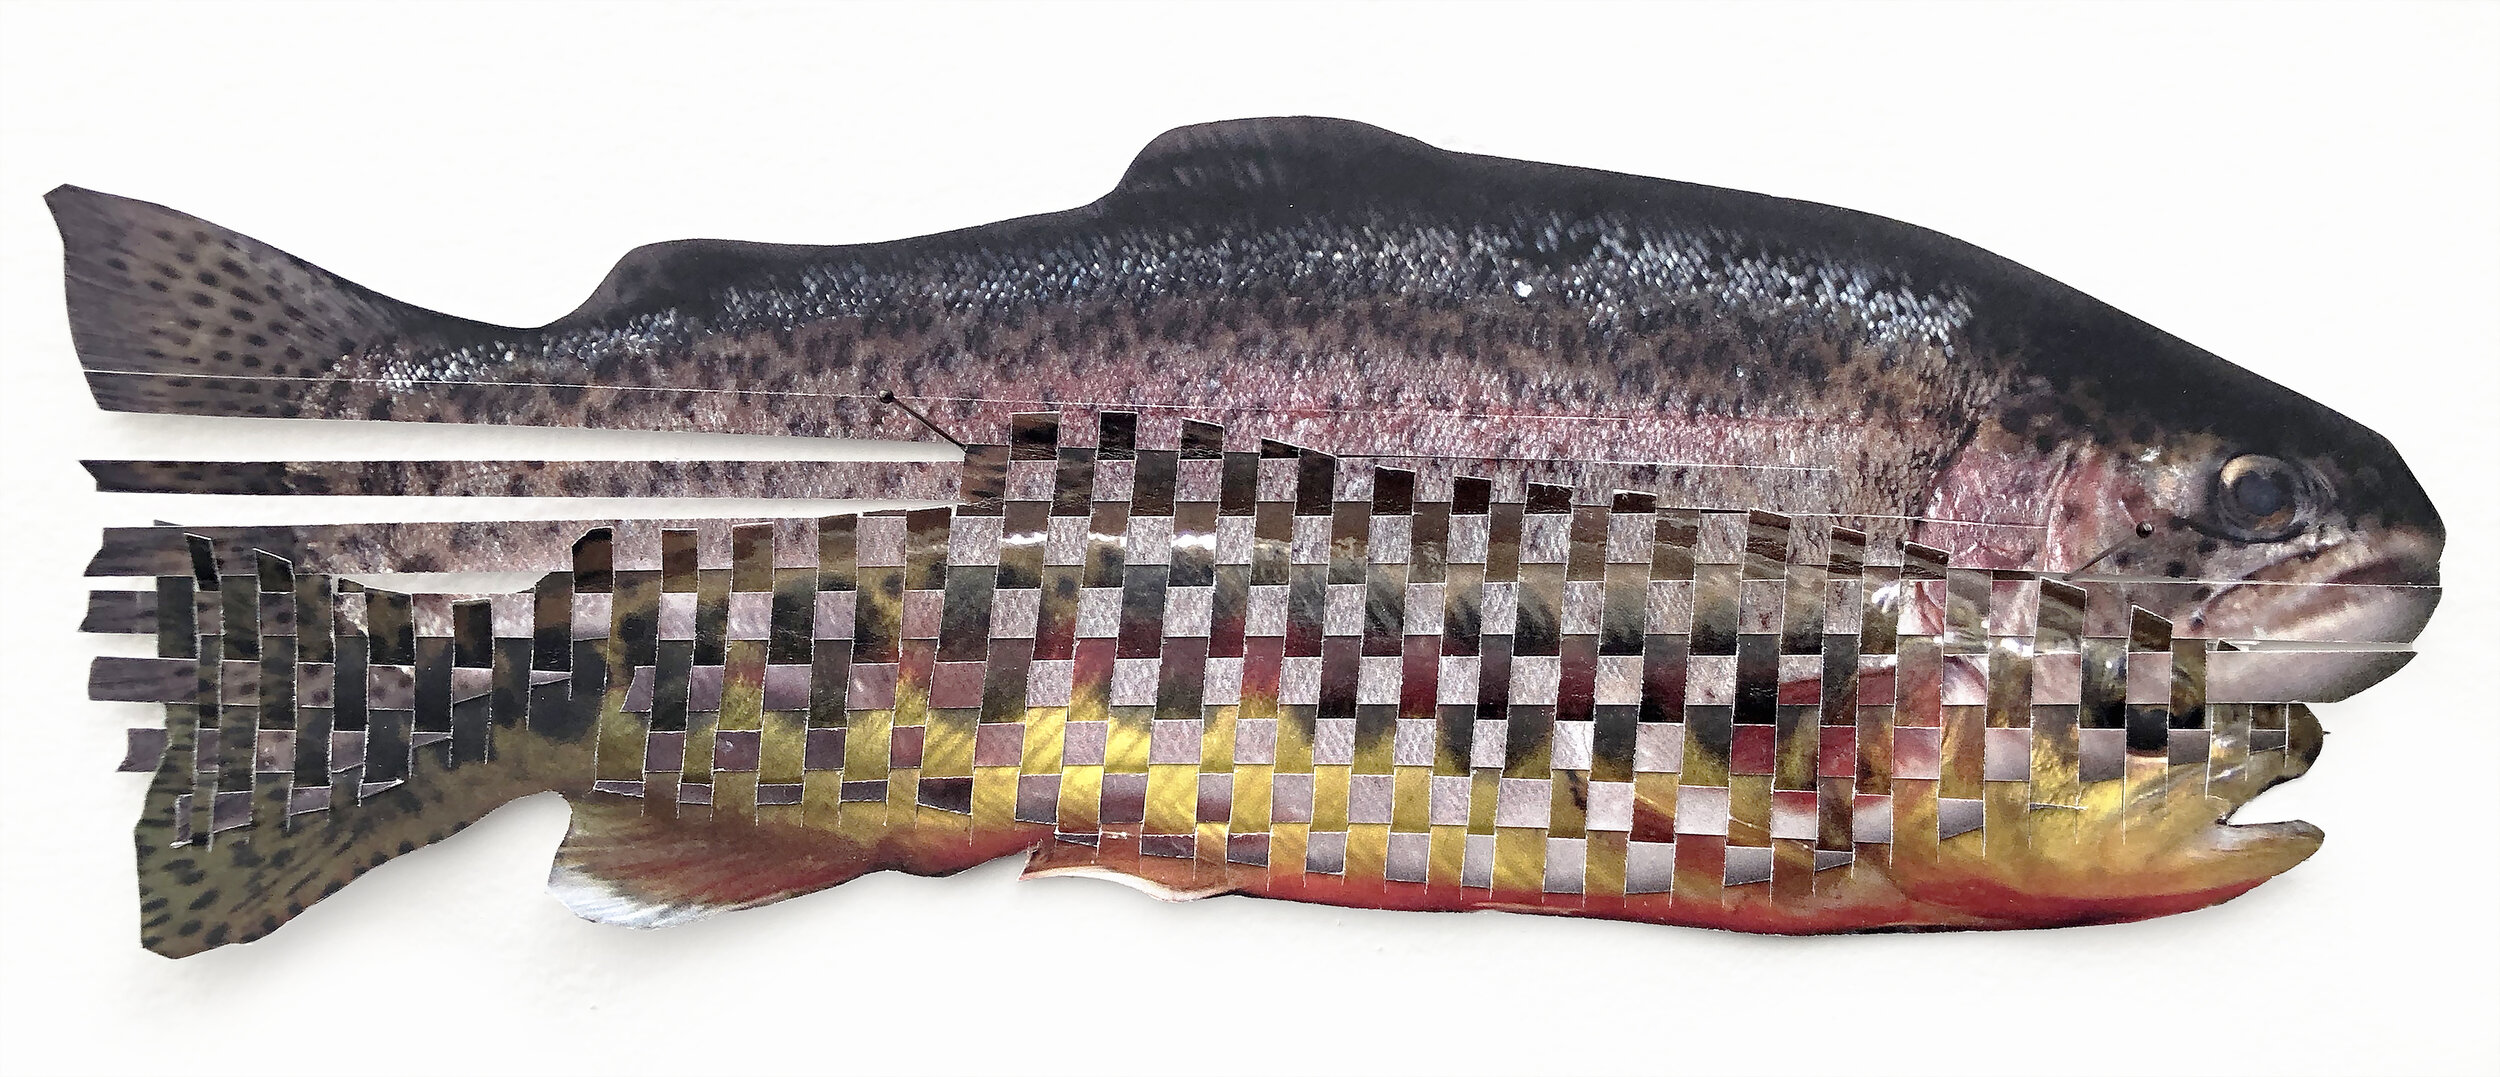  Absorption (Goldbow Trout)   2020   Photos on paper (Golden trout, rainbow trout)  5” x 12” (other dimensions variable)  The golden trout is an endangered subspecies of fish endemic to the United States. Its decline is spurred by the accidental intr